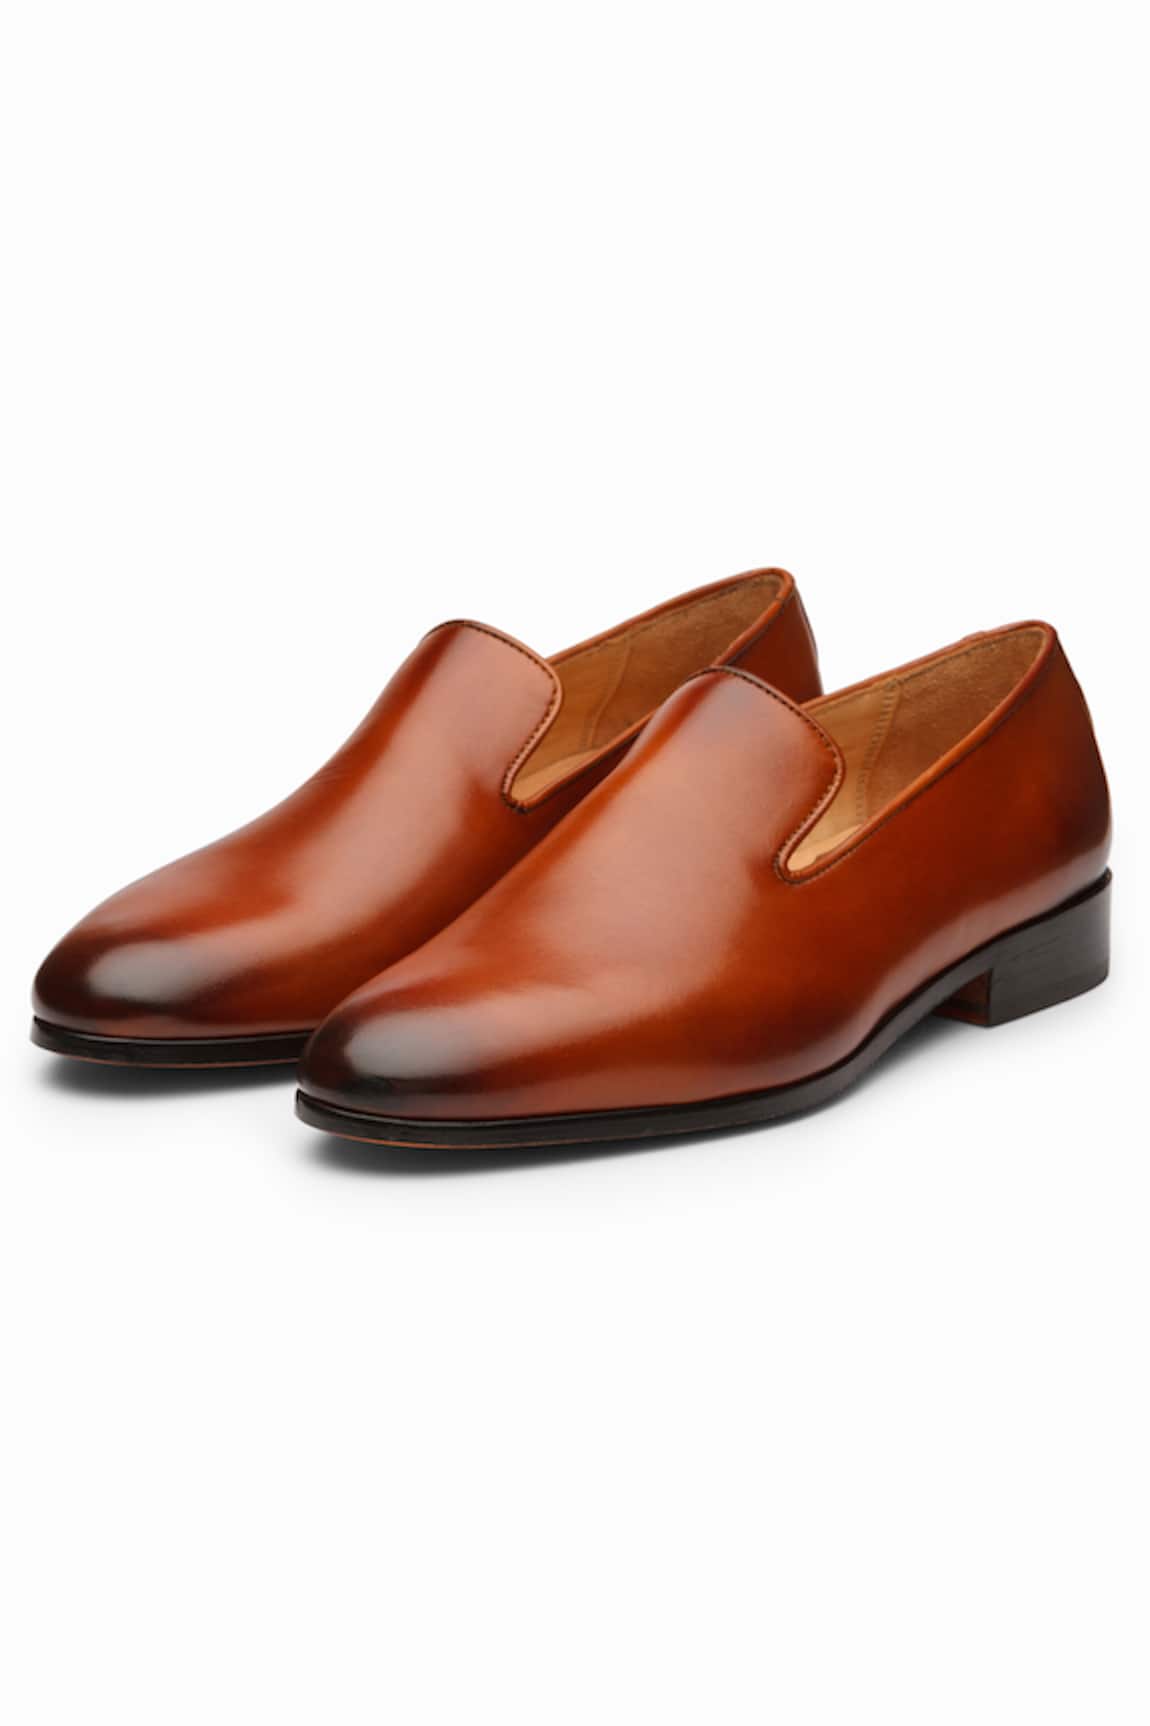 3DM LIFESTYLE Venetian Leather Loafers